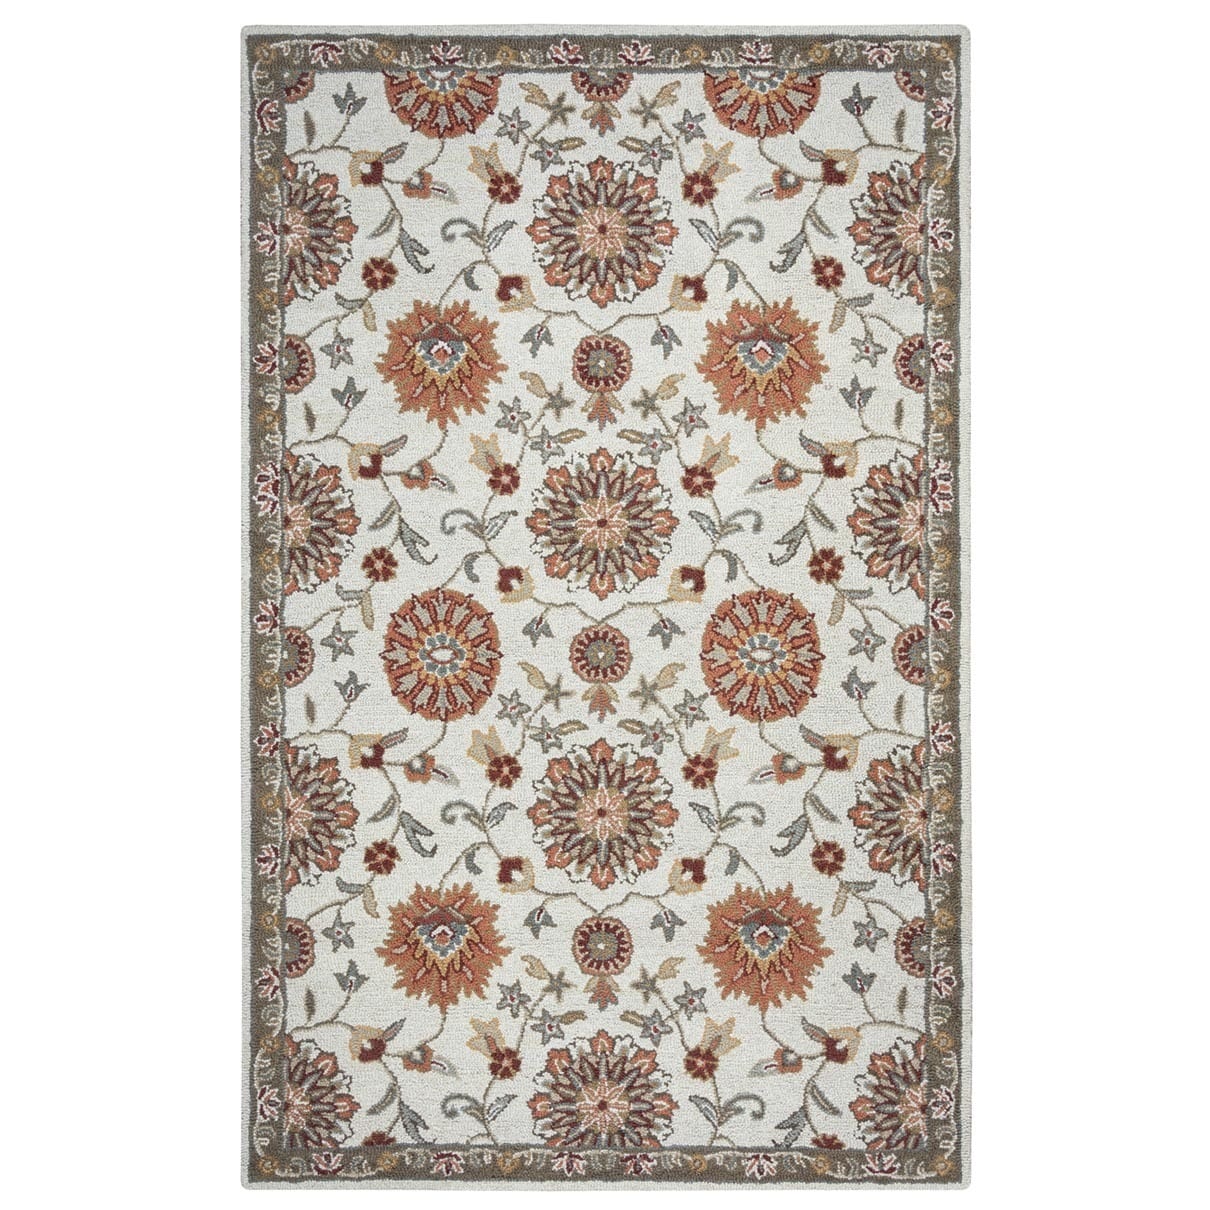 Hand tufted Handicraft Imports Aisling Beige New Zealand Wool Blend Area Rug (9 X 12)